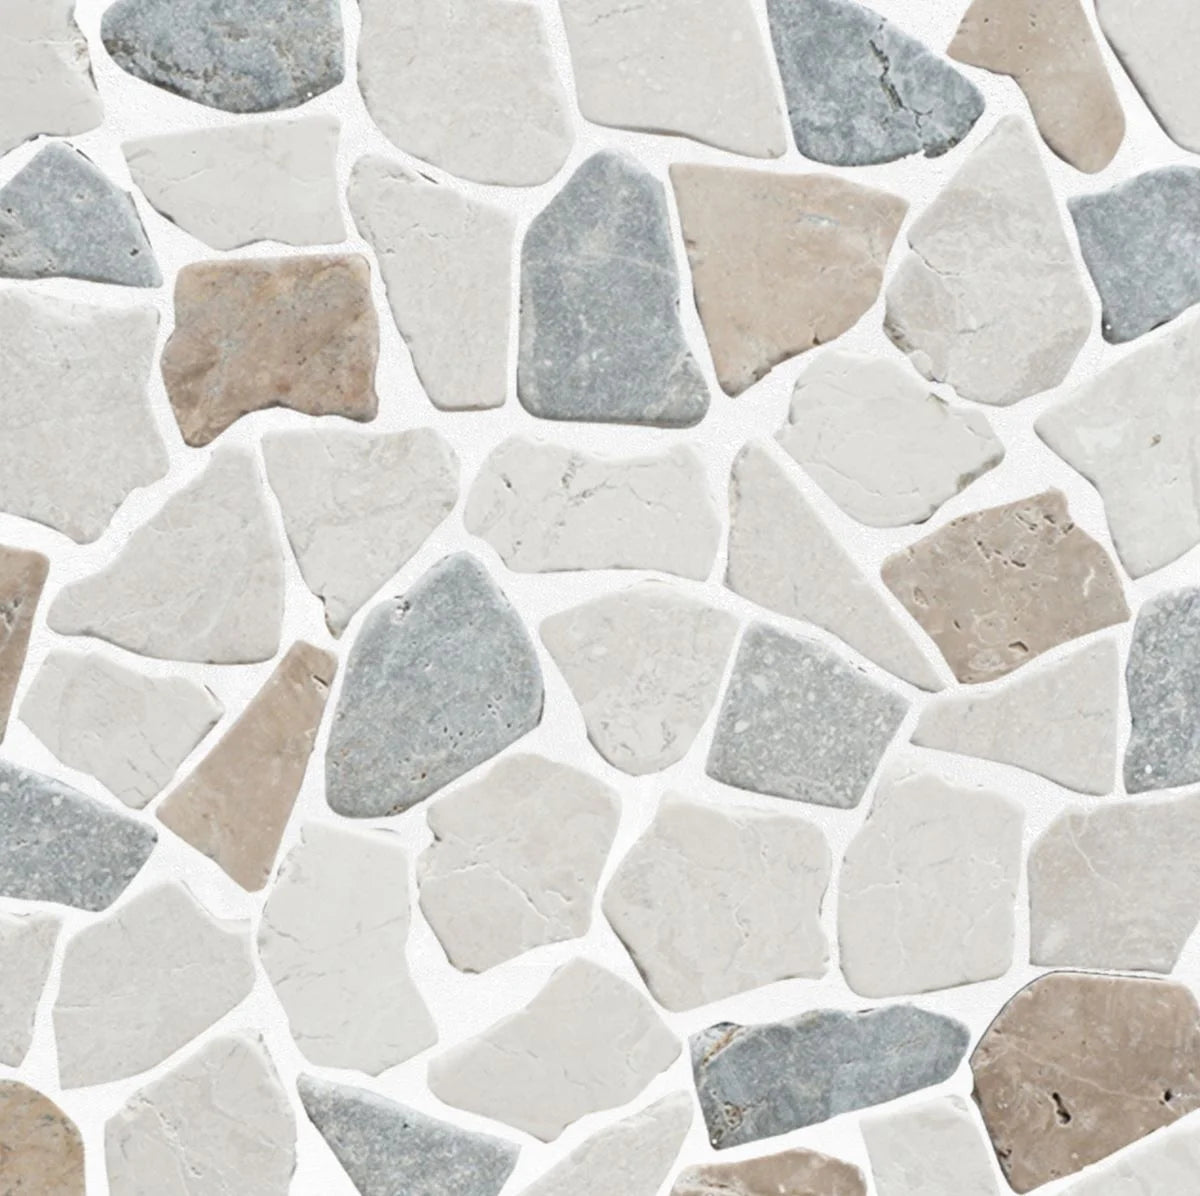 seasand random tile sample close up with grout